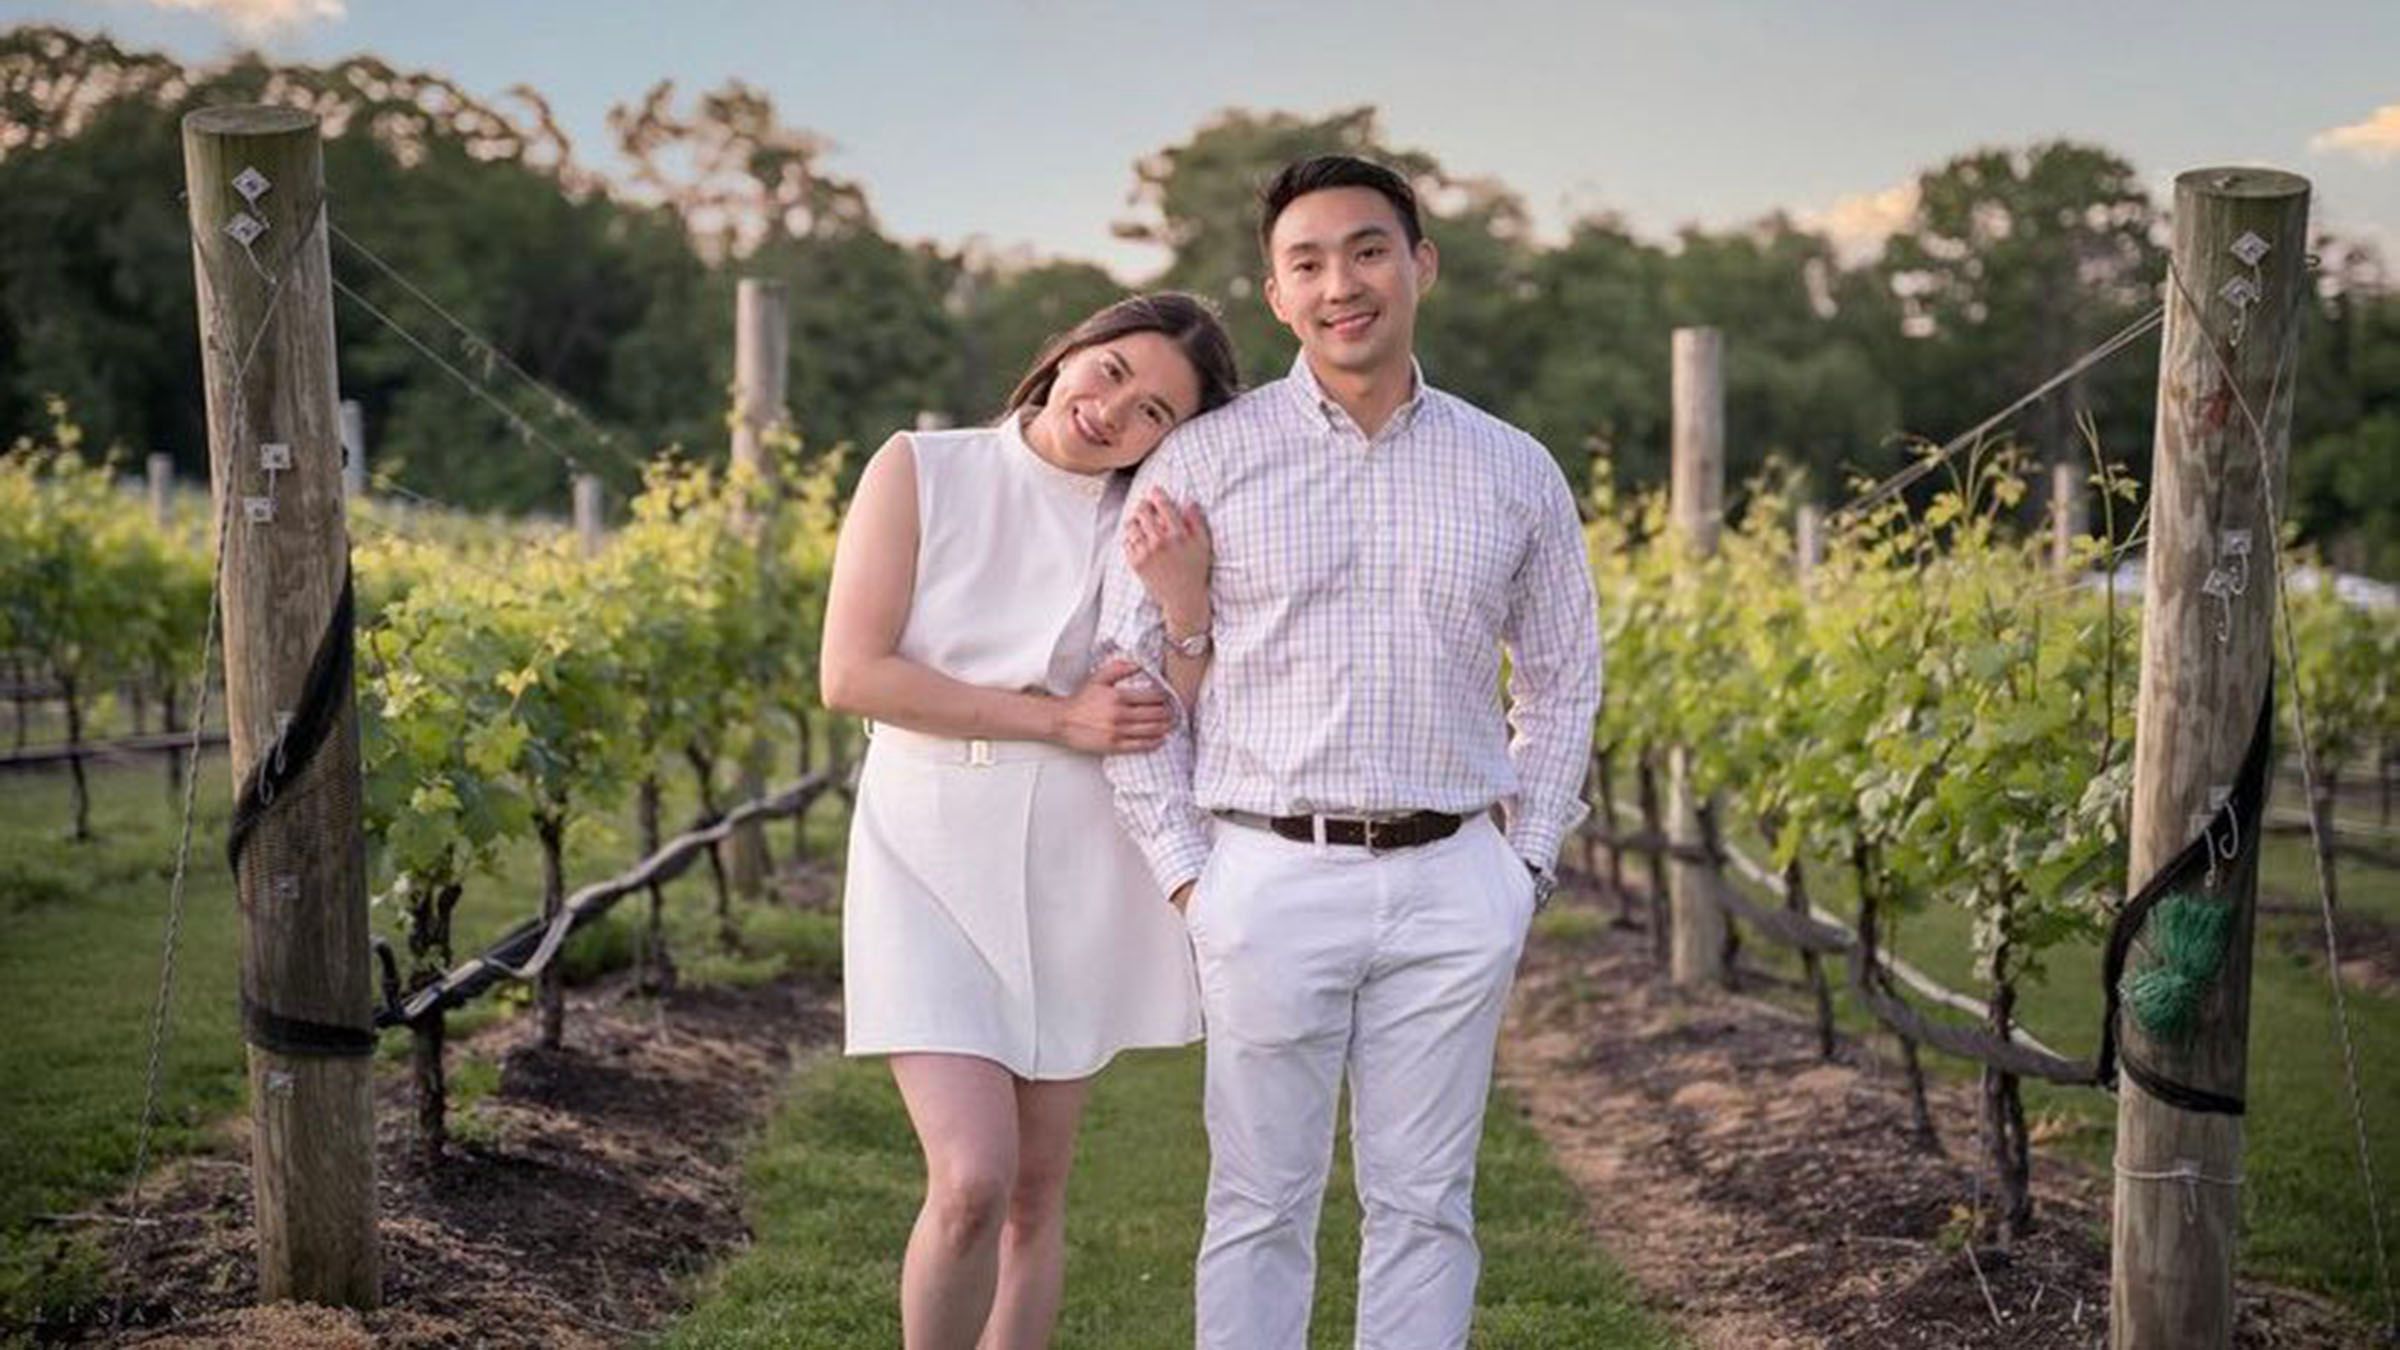 LJ Reyes is engaged to a New Yorker